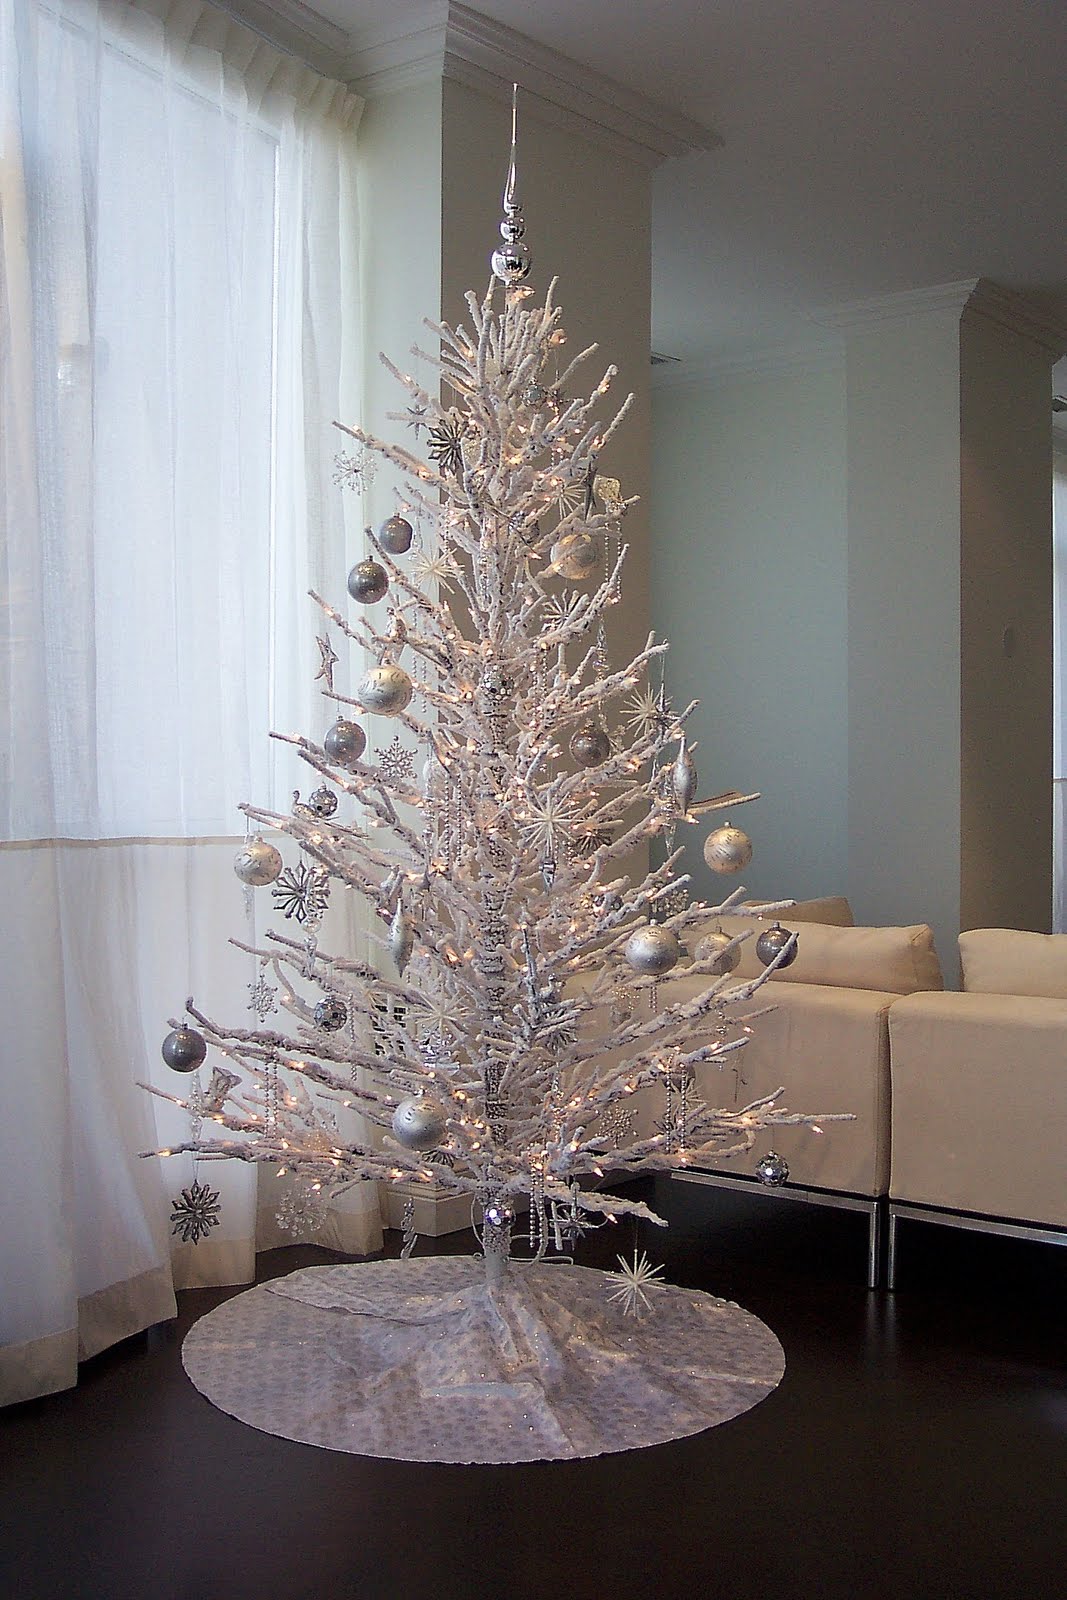 Professional Home Staging & Interior Design: White Christmas Trees